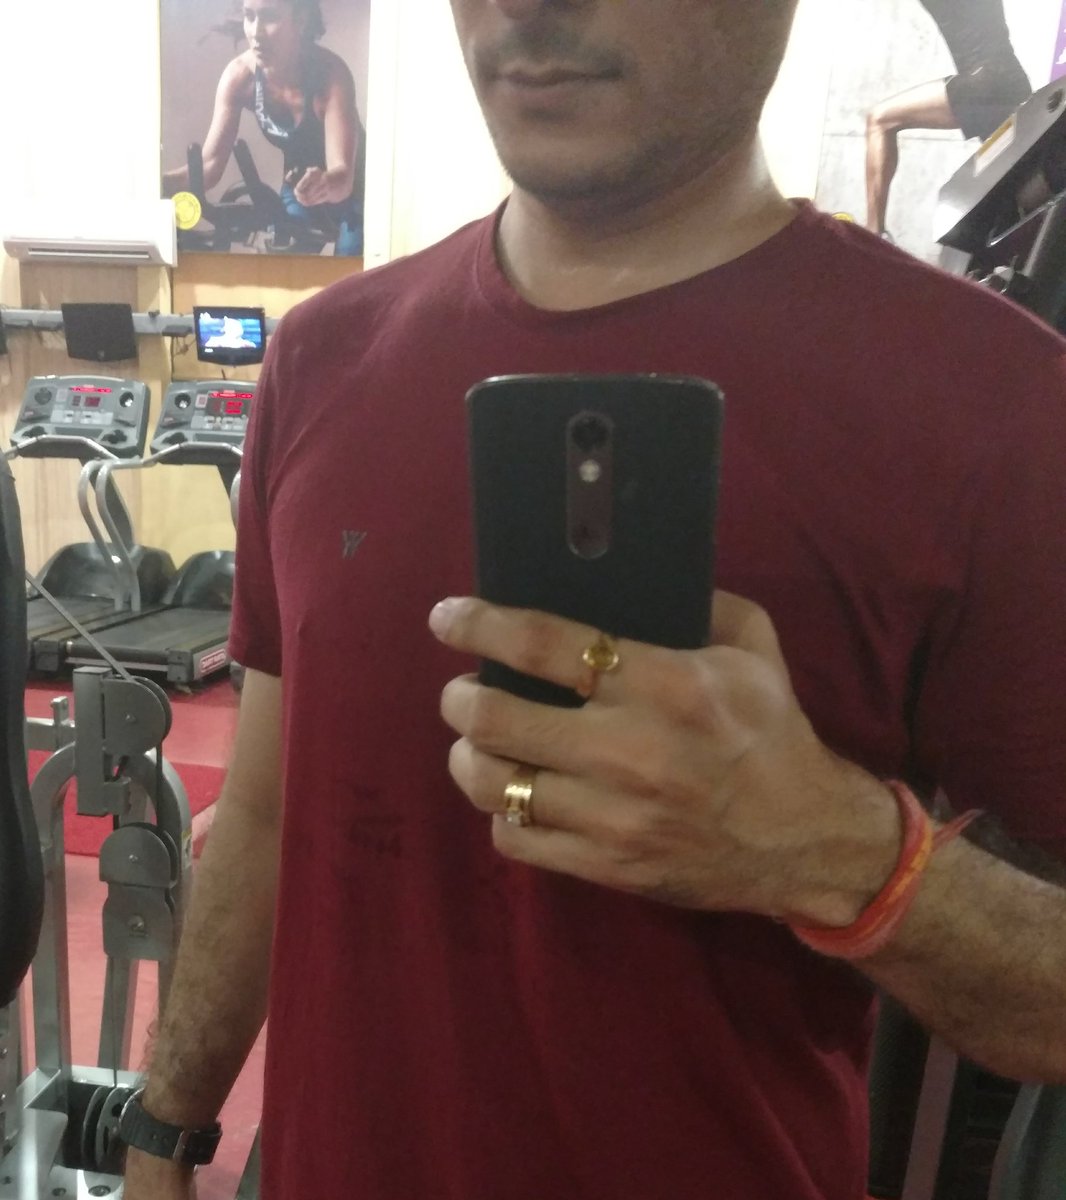 Wearing the red @GreyyBasics T-shirt. Probably the best T-shirt I ever had. #WearItAnywhere #SportsTshirt #WorthBuy #NoOdour #CottonTech 
#NeedMoreOptions